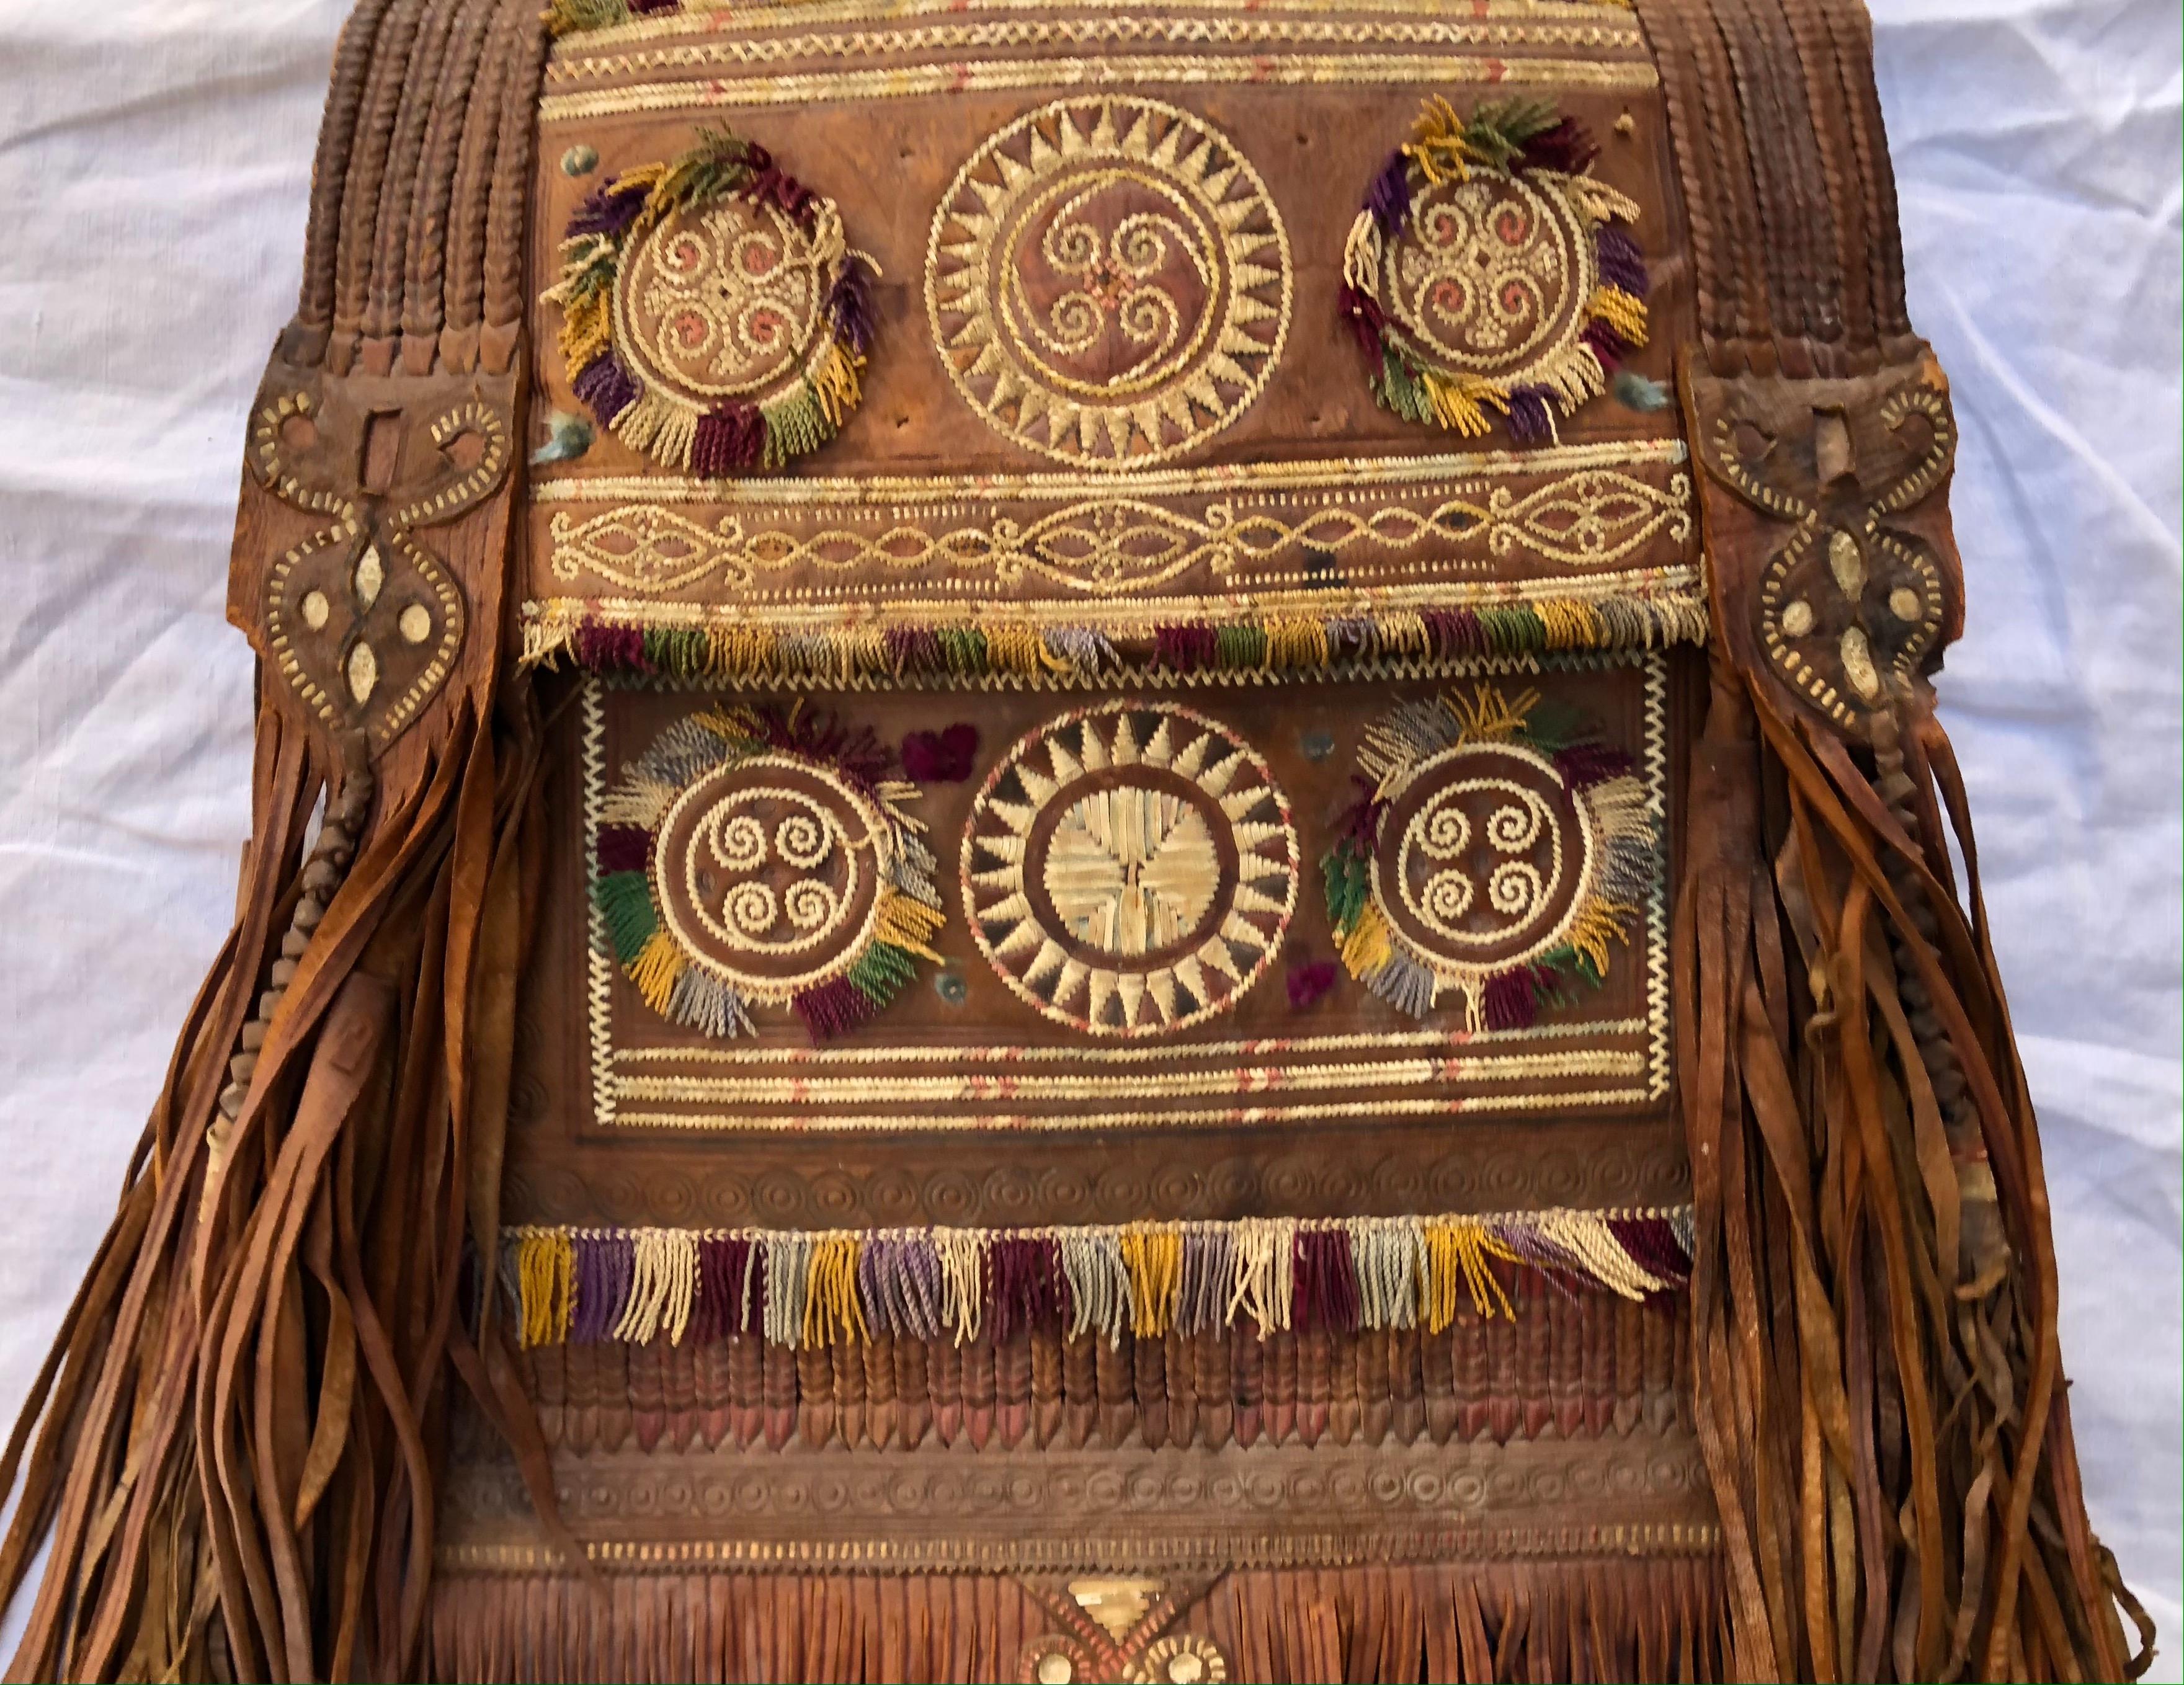 A beautiful antique North African Tuareg Sahara bag. Tribally hand crafted, dyed, embroidered, leather bag with long fringe. The Tuareg are Berber people with a traditionally nomadic pastoralist lifestyle. They are the principal inhabitants of the